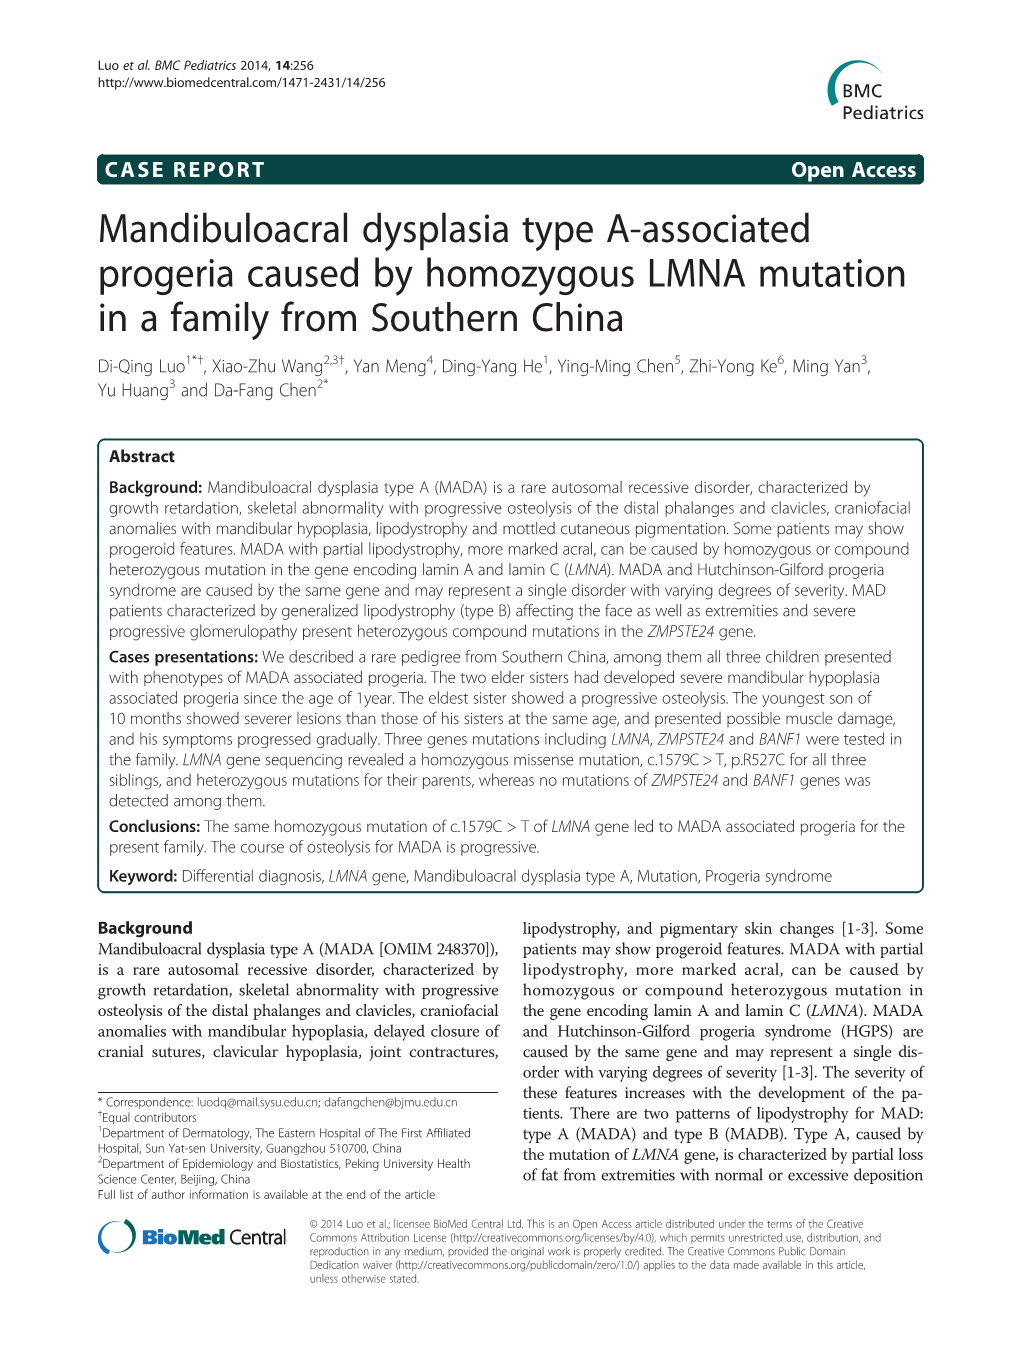 Mandibuloacral Dysplasia Type A-Associated Progeria Caused by Homozygous LMNA Mutation in a Family from Southern China